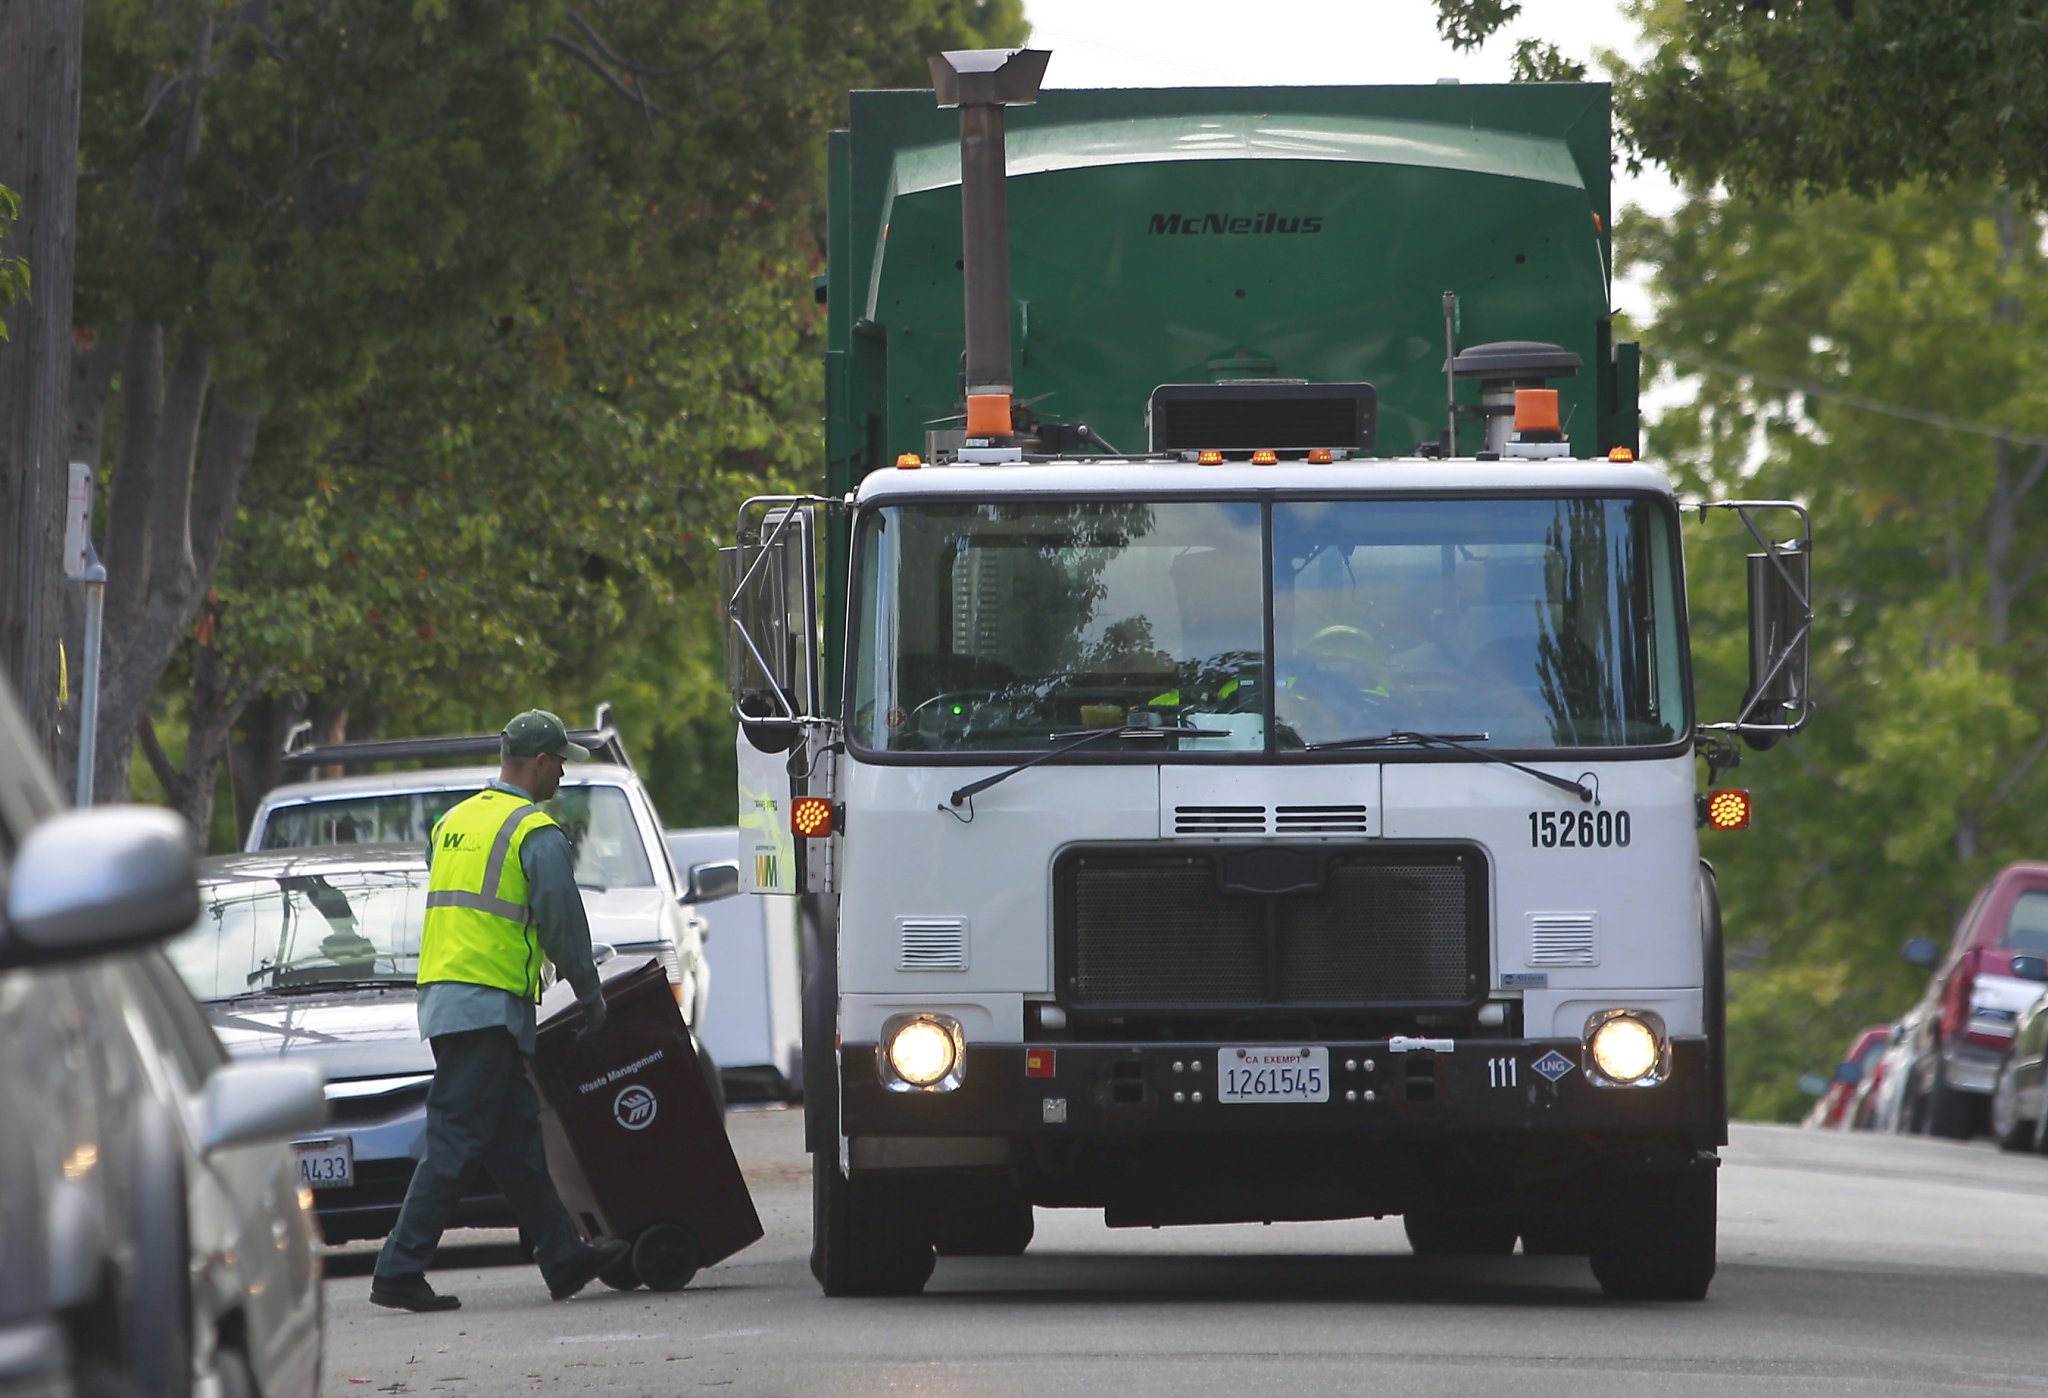 Waste Management sues Oakland over $1 billion trash contract